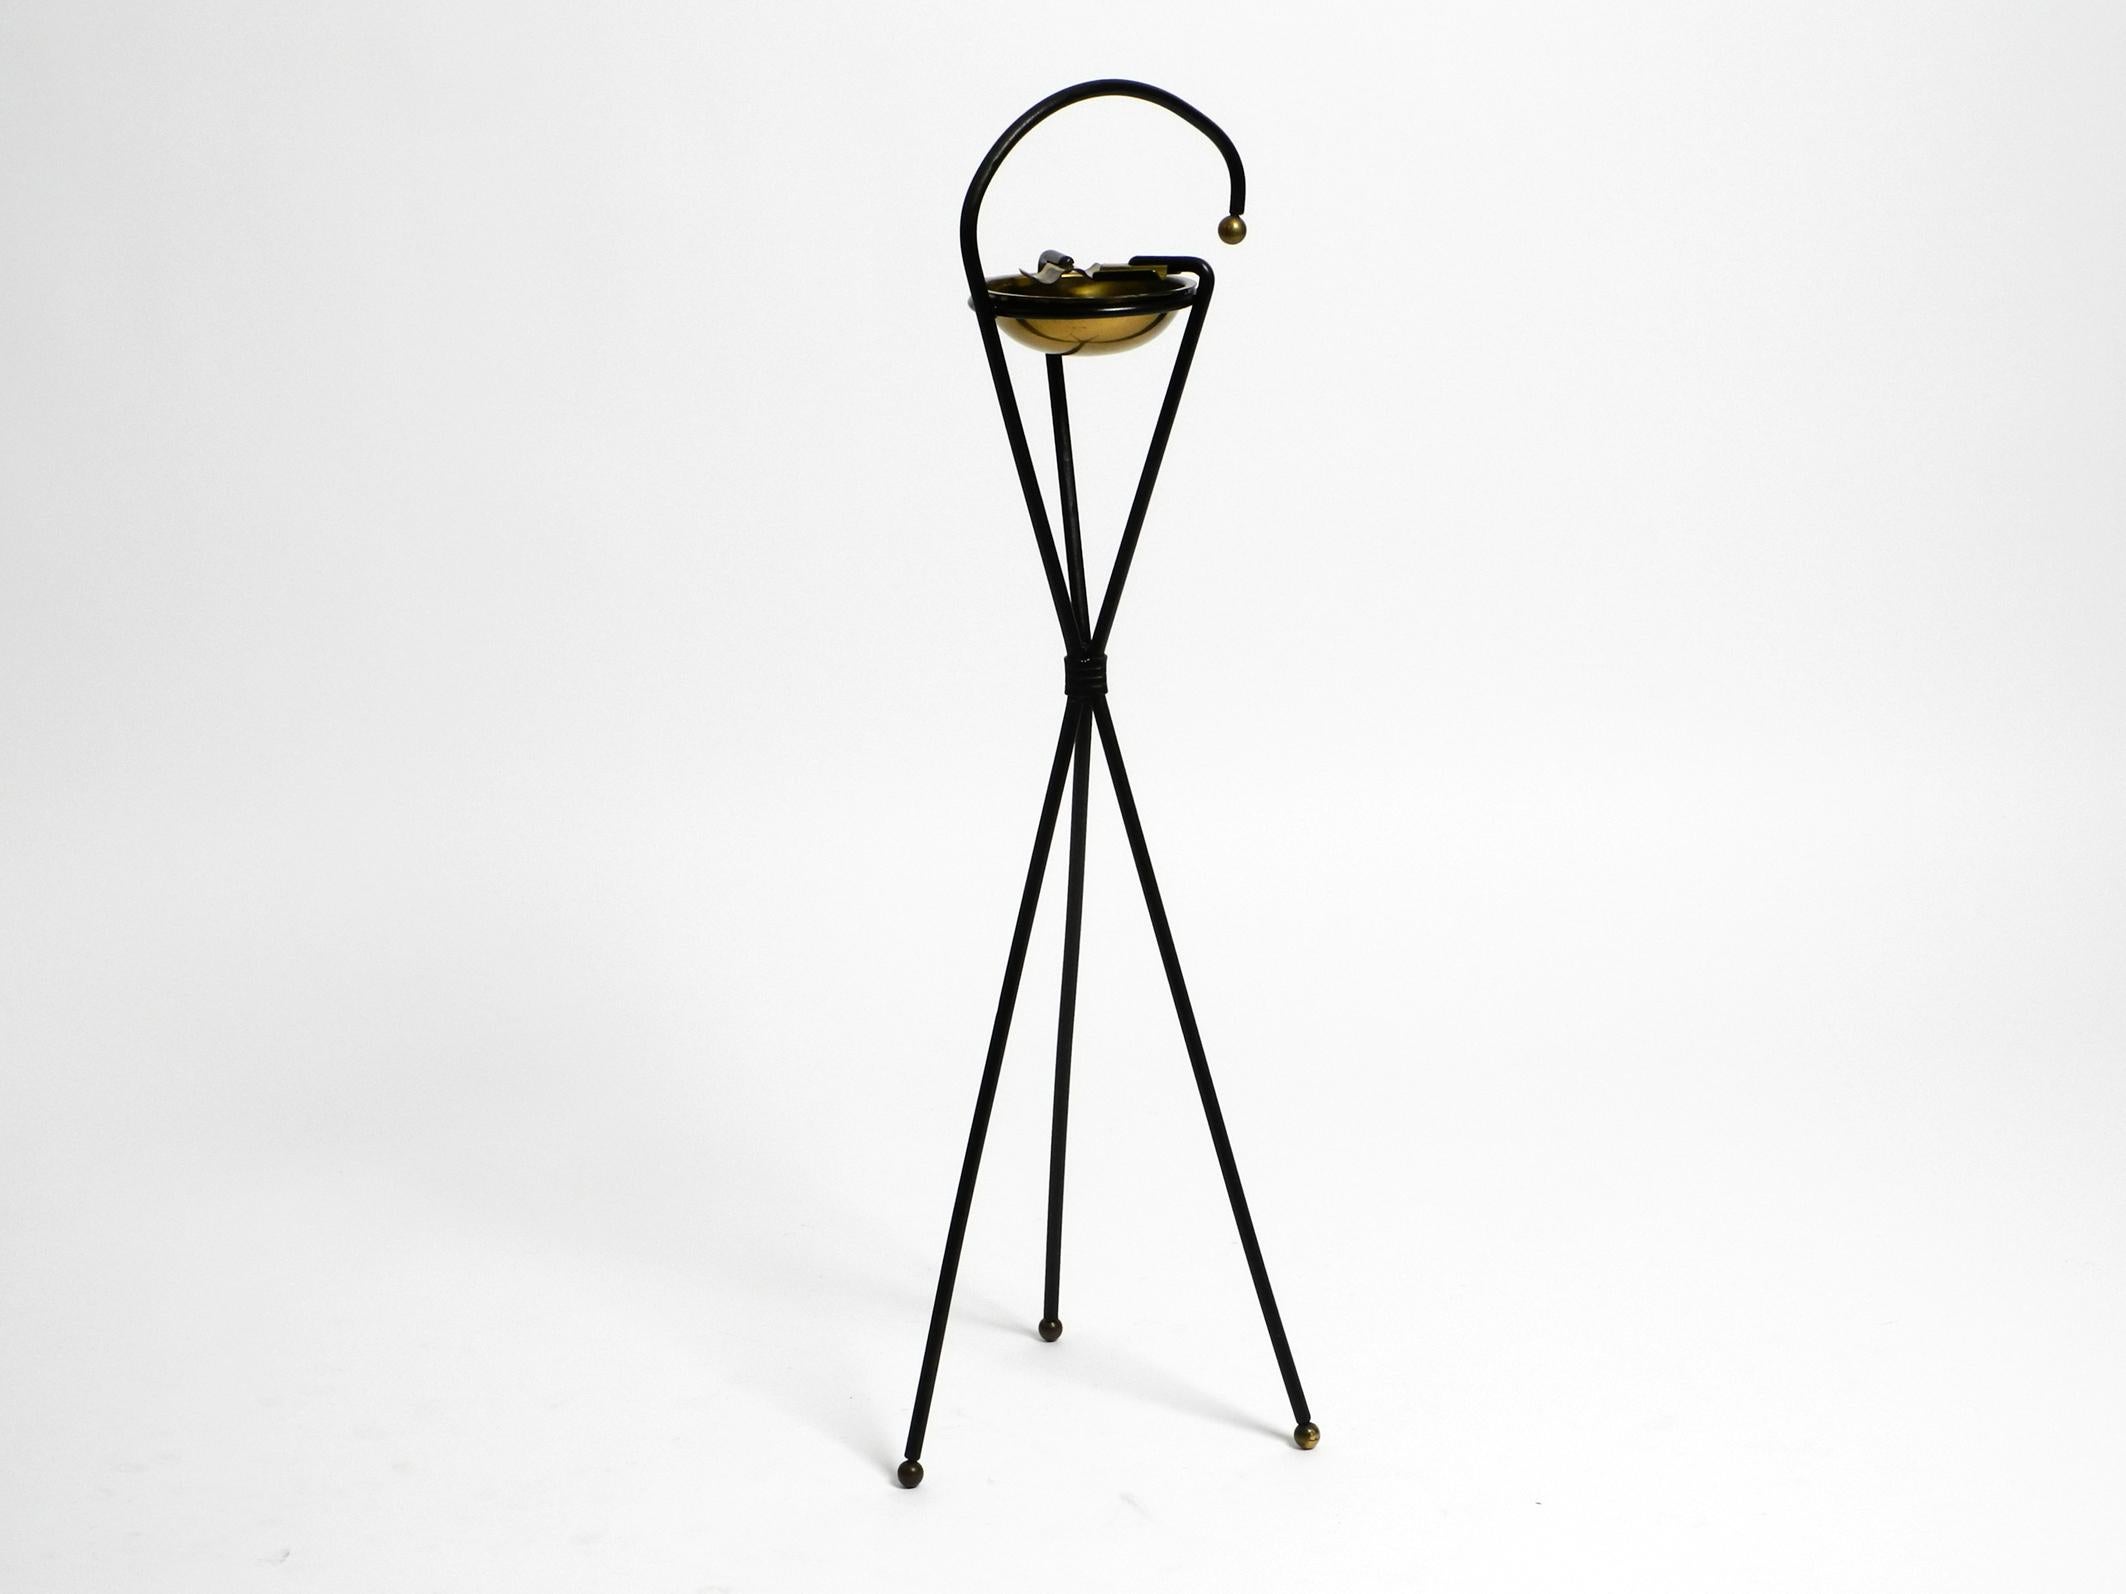 Super chic original Mid Century tripod standing ashtray with a gorgeous patina.
Solid iron frame painted in black.
The bowl, the cigarette holders and the balls on the base and on the handle are made of brass.
Beautiful minimalist design from the